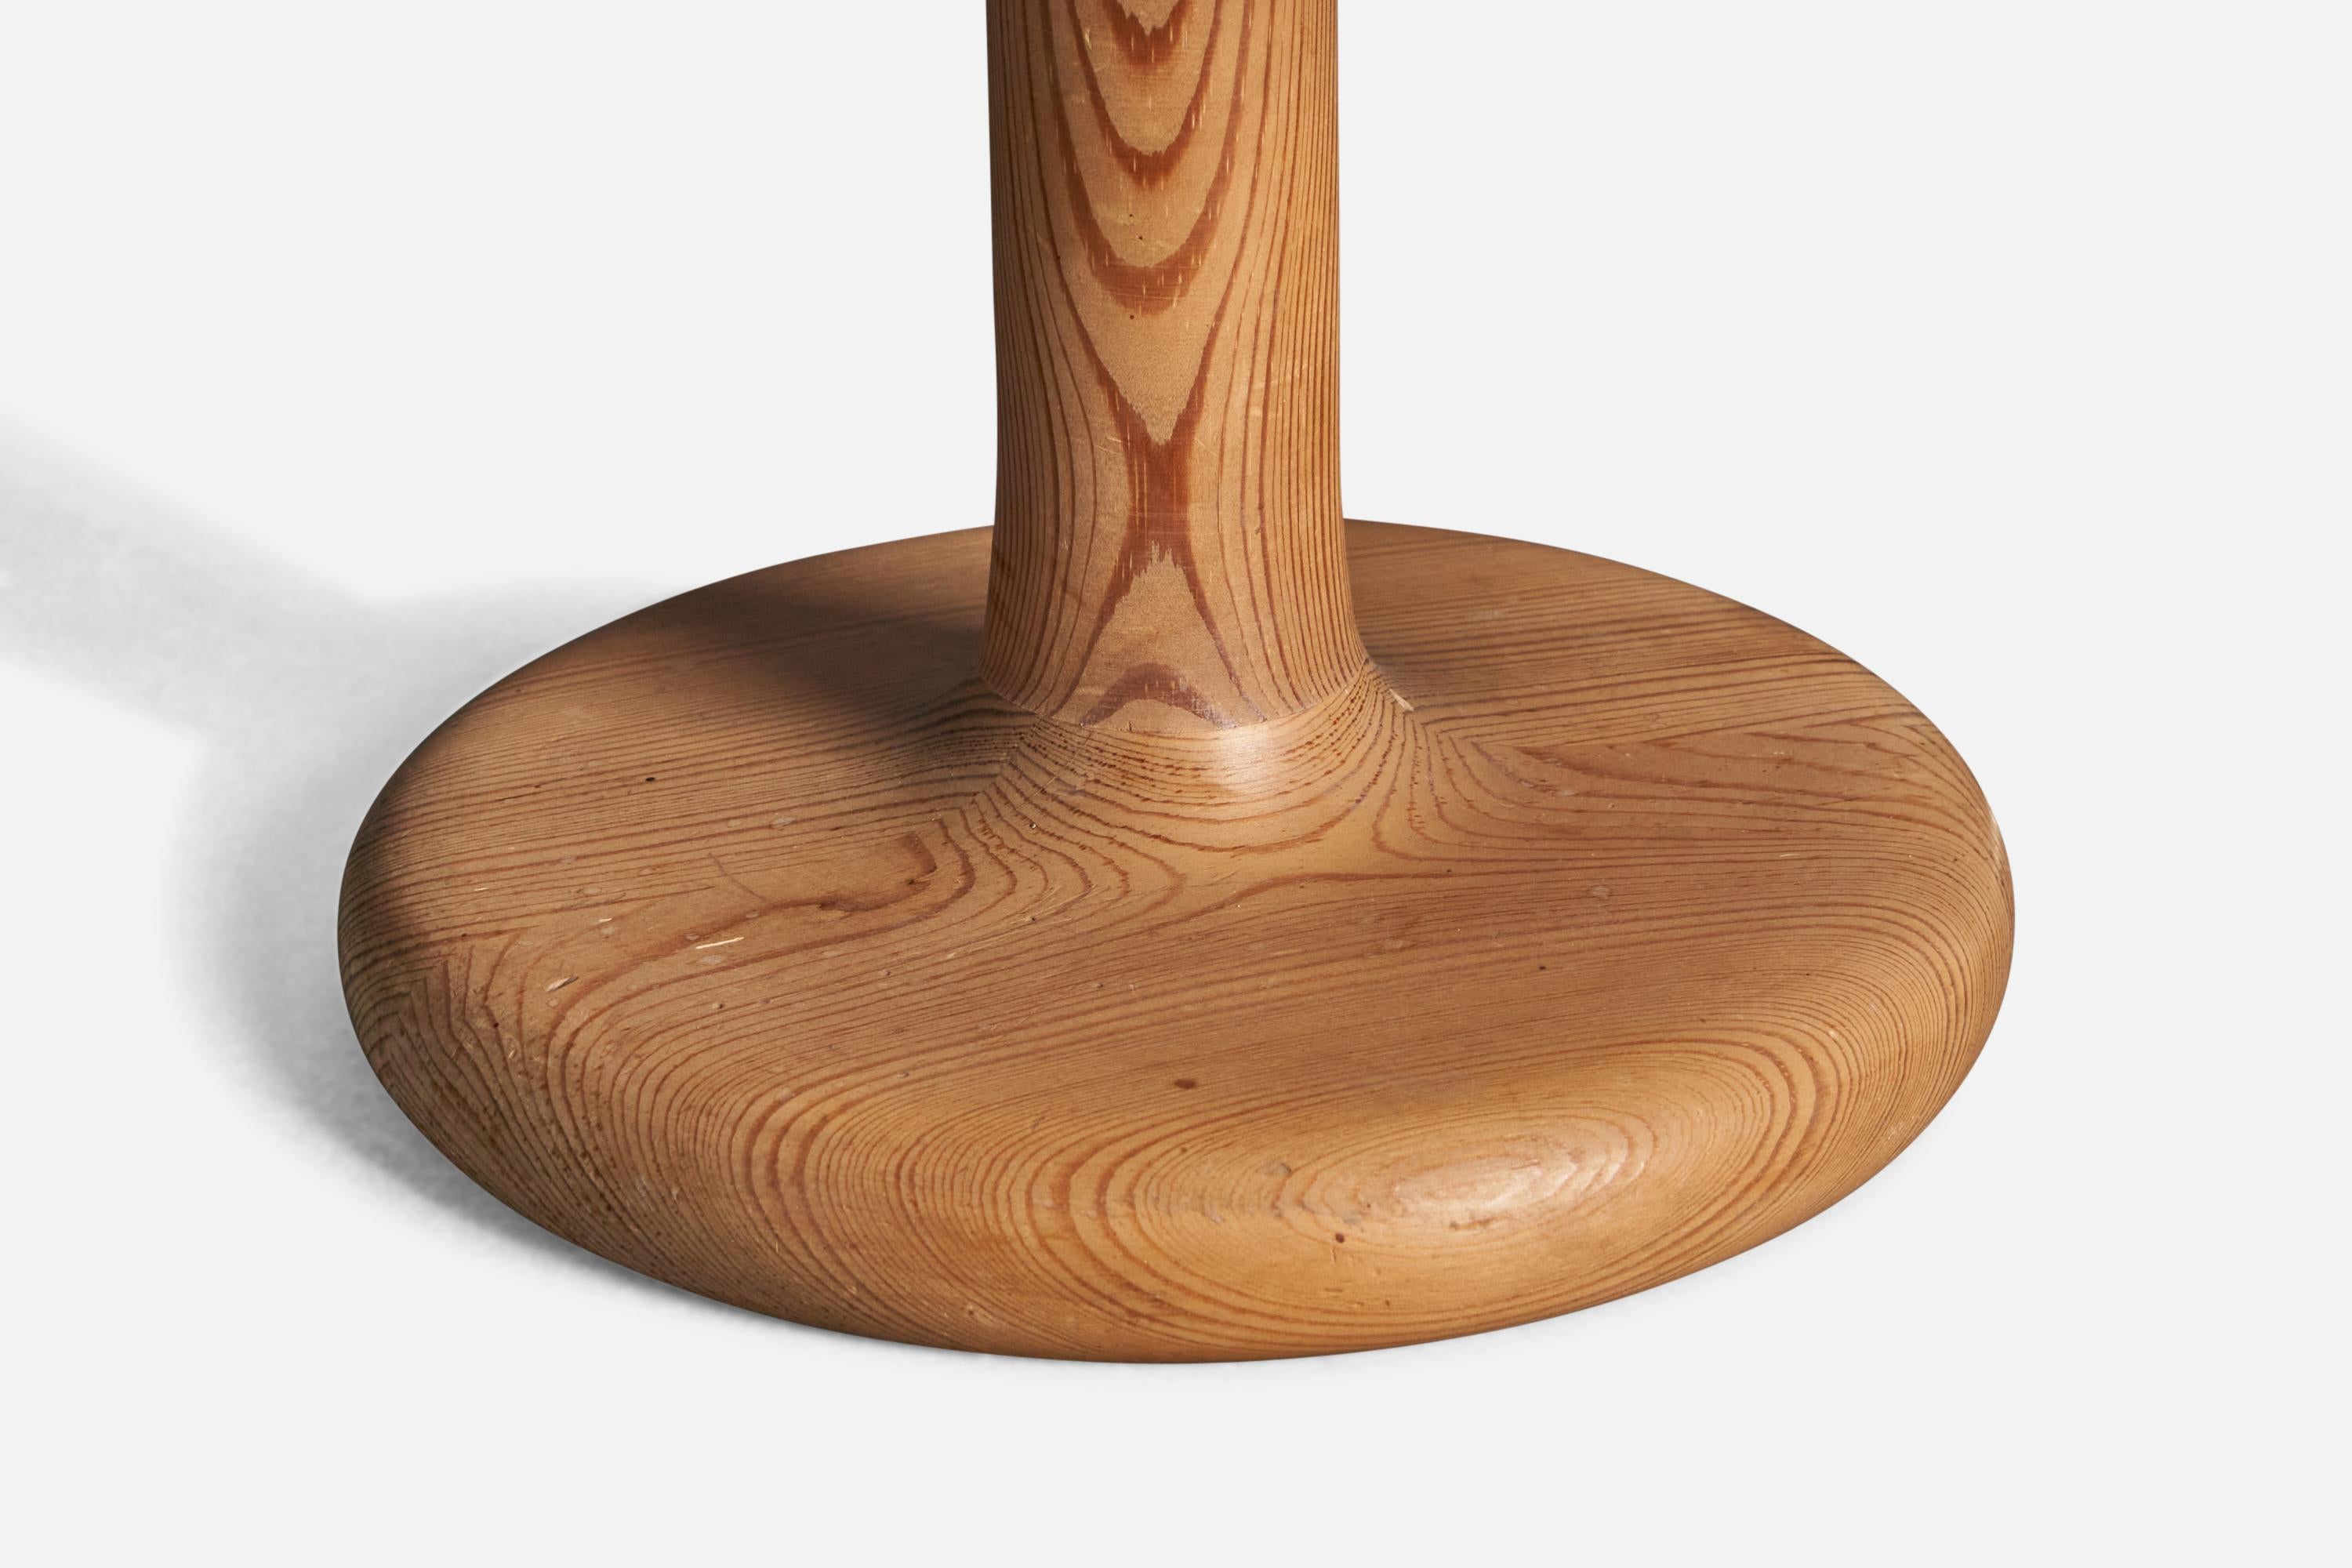 A table lamp designed and produced by Aneta. In solid pine. With makers label.

Condition: Good 
Wear consistent with age and use.

Dimensions of Lamp (inches): 12” H x 7.75” Diameter

Dimensions of Shade (inches): 6.5” Top Diameter x 14.15” Bottom